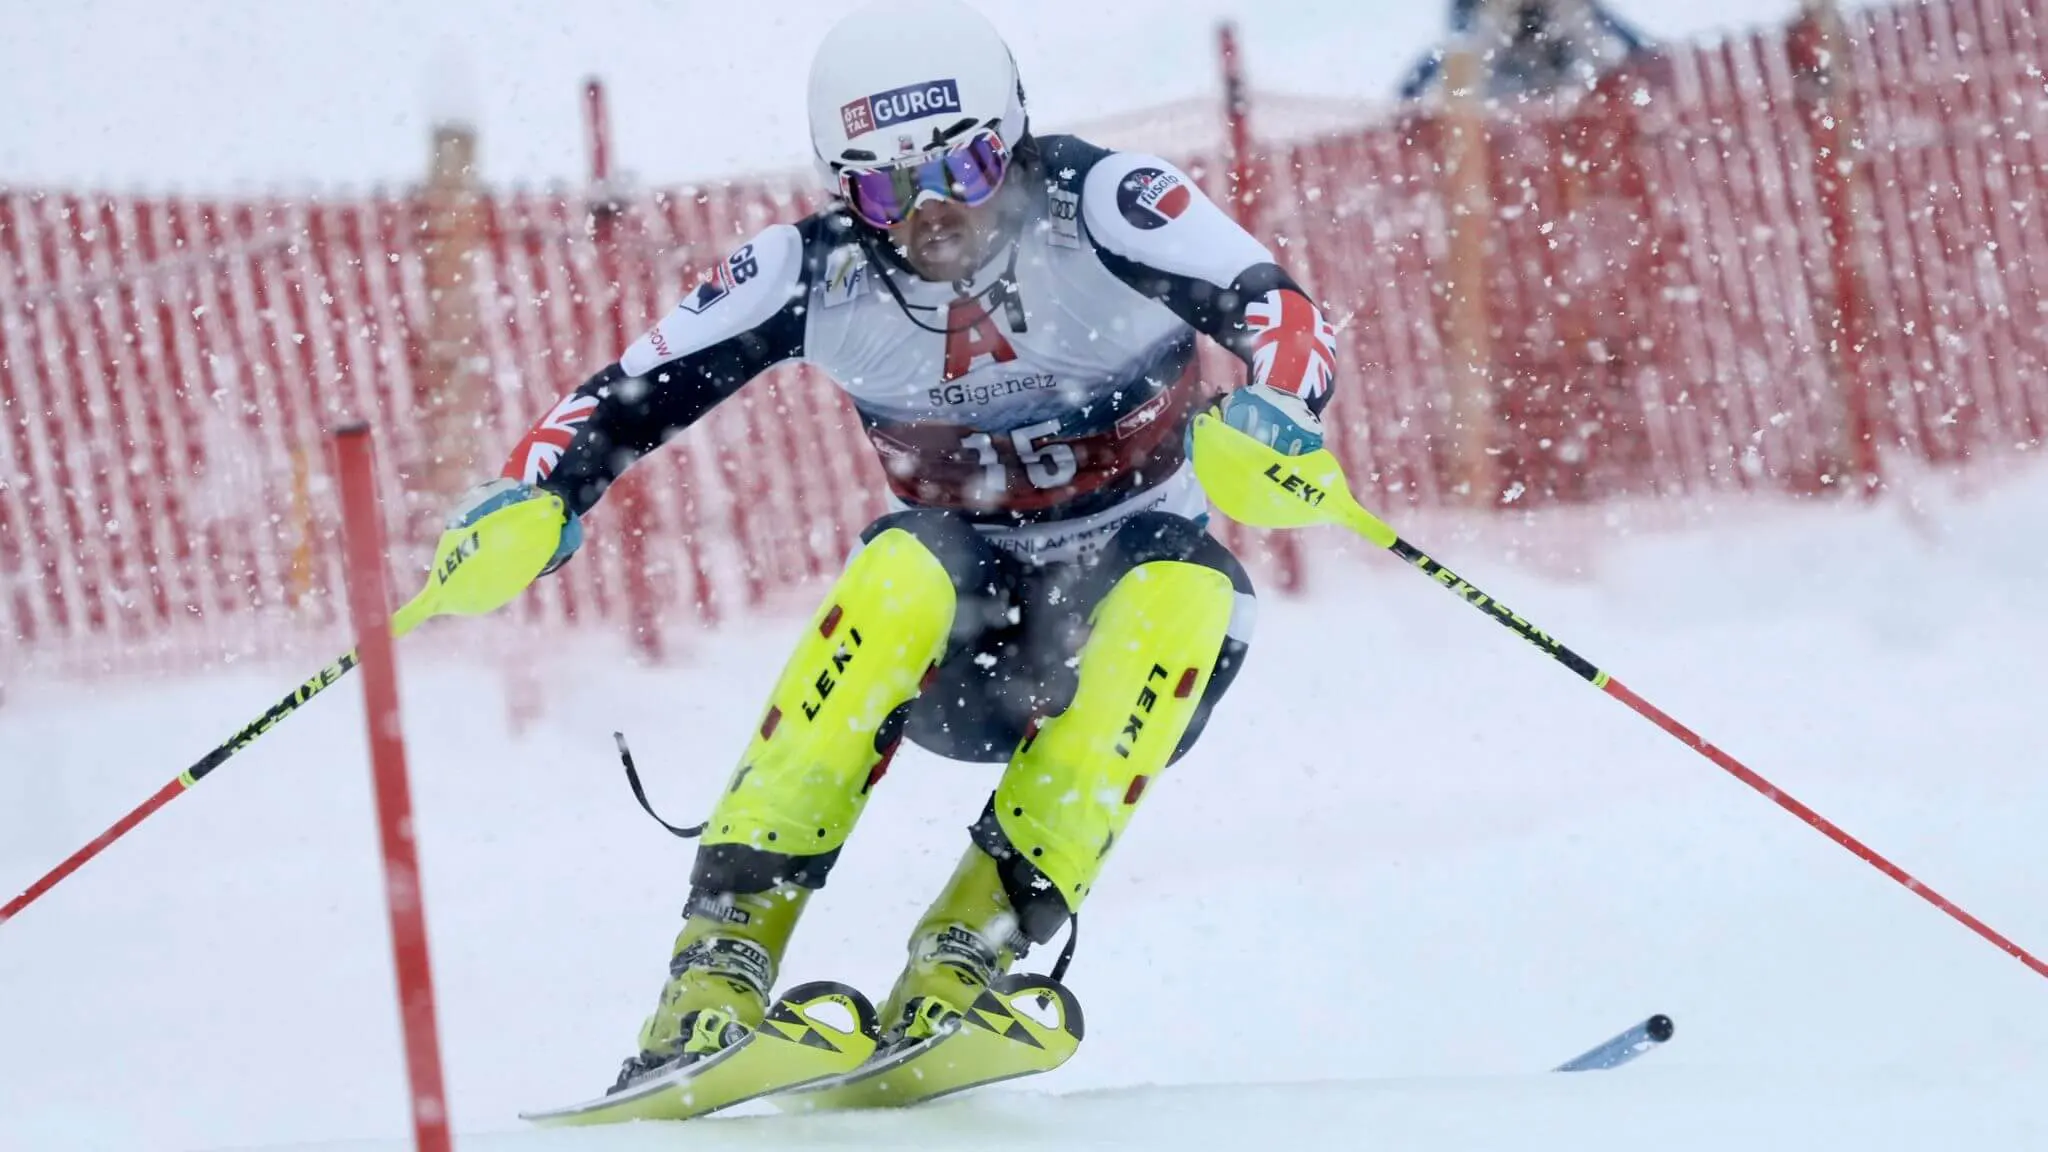 Dave Ryding skiing in his WC win at 2022 Kitzbuehel Slalom